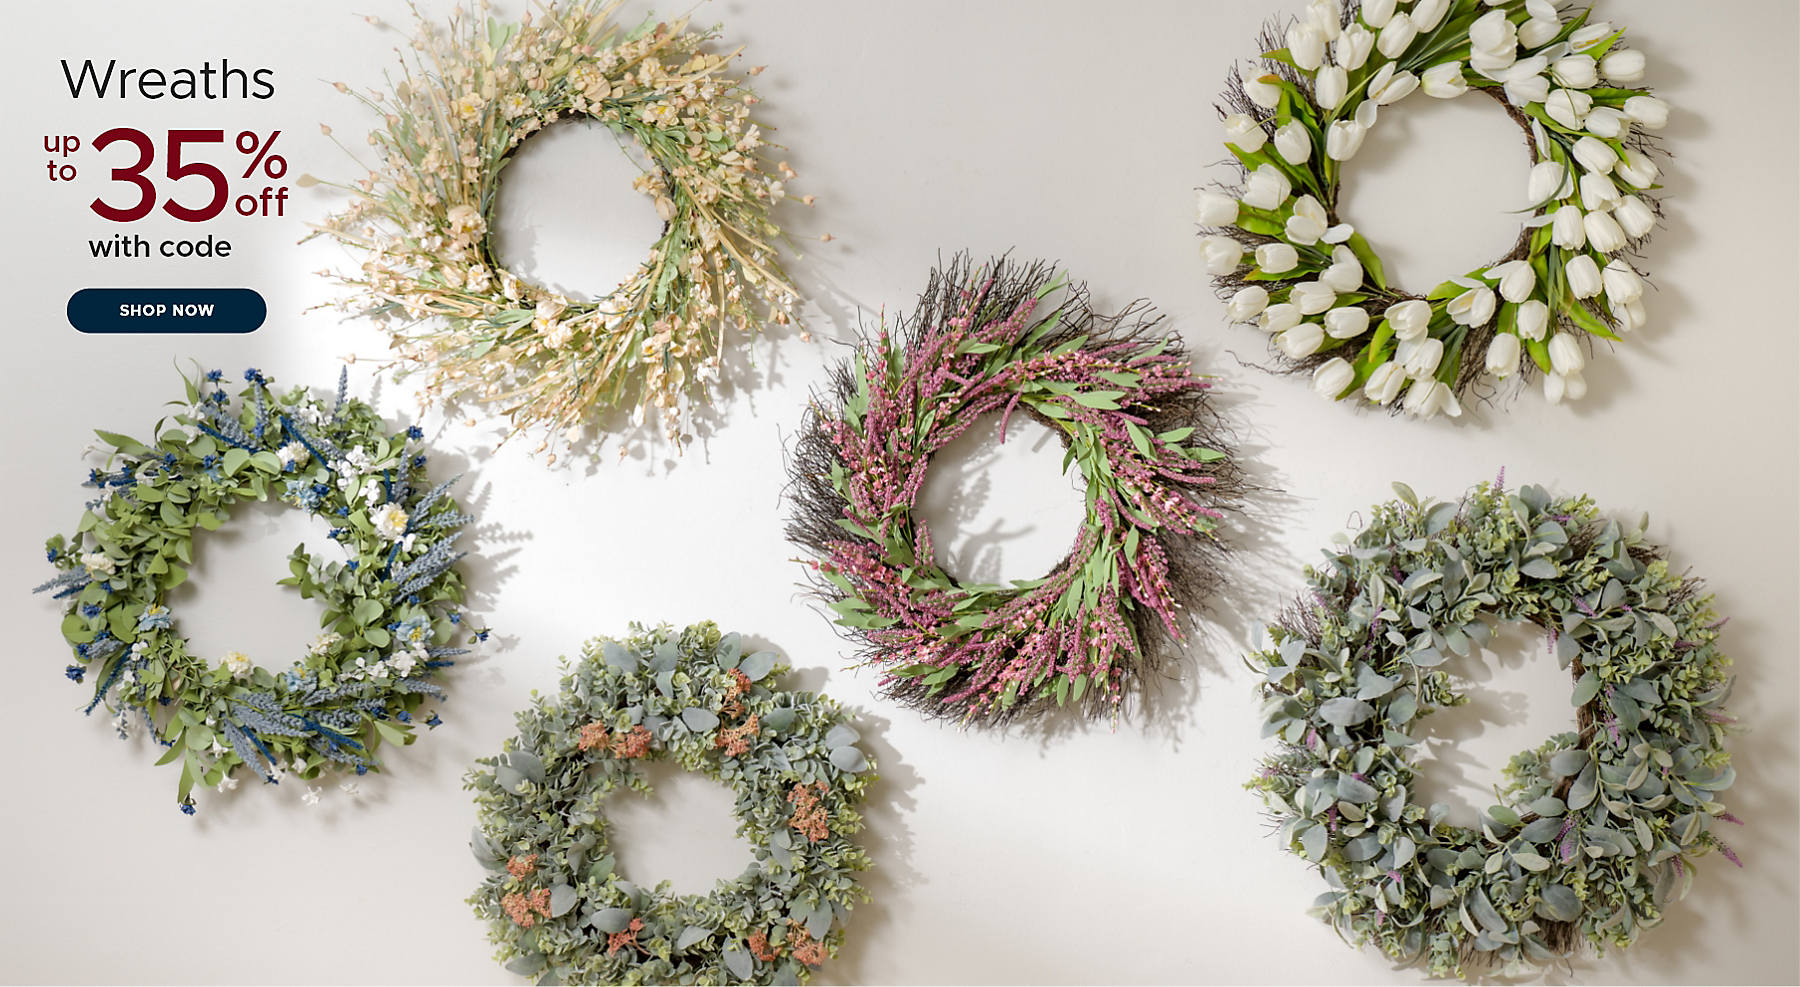 Wreaths up to 35% off with code shop now